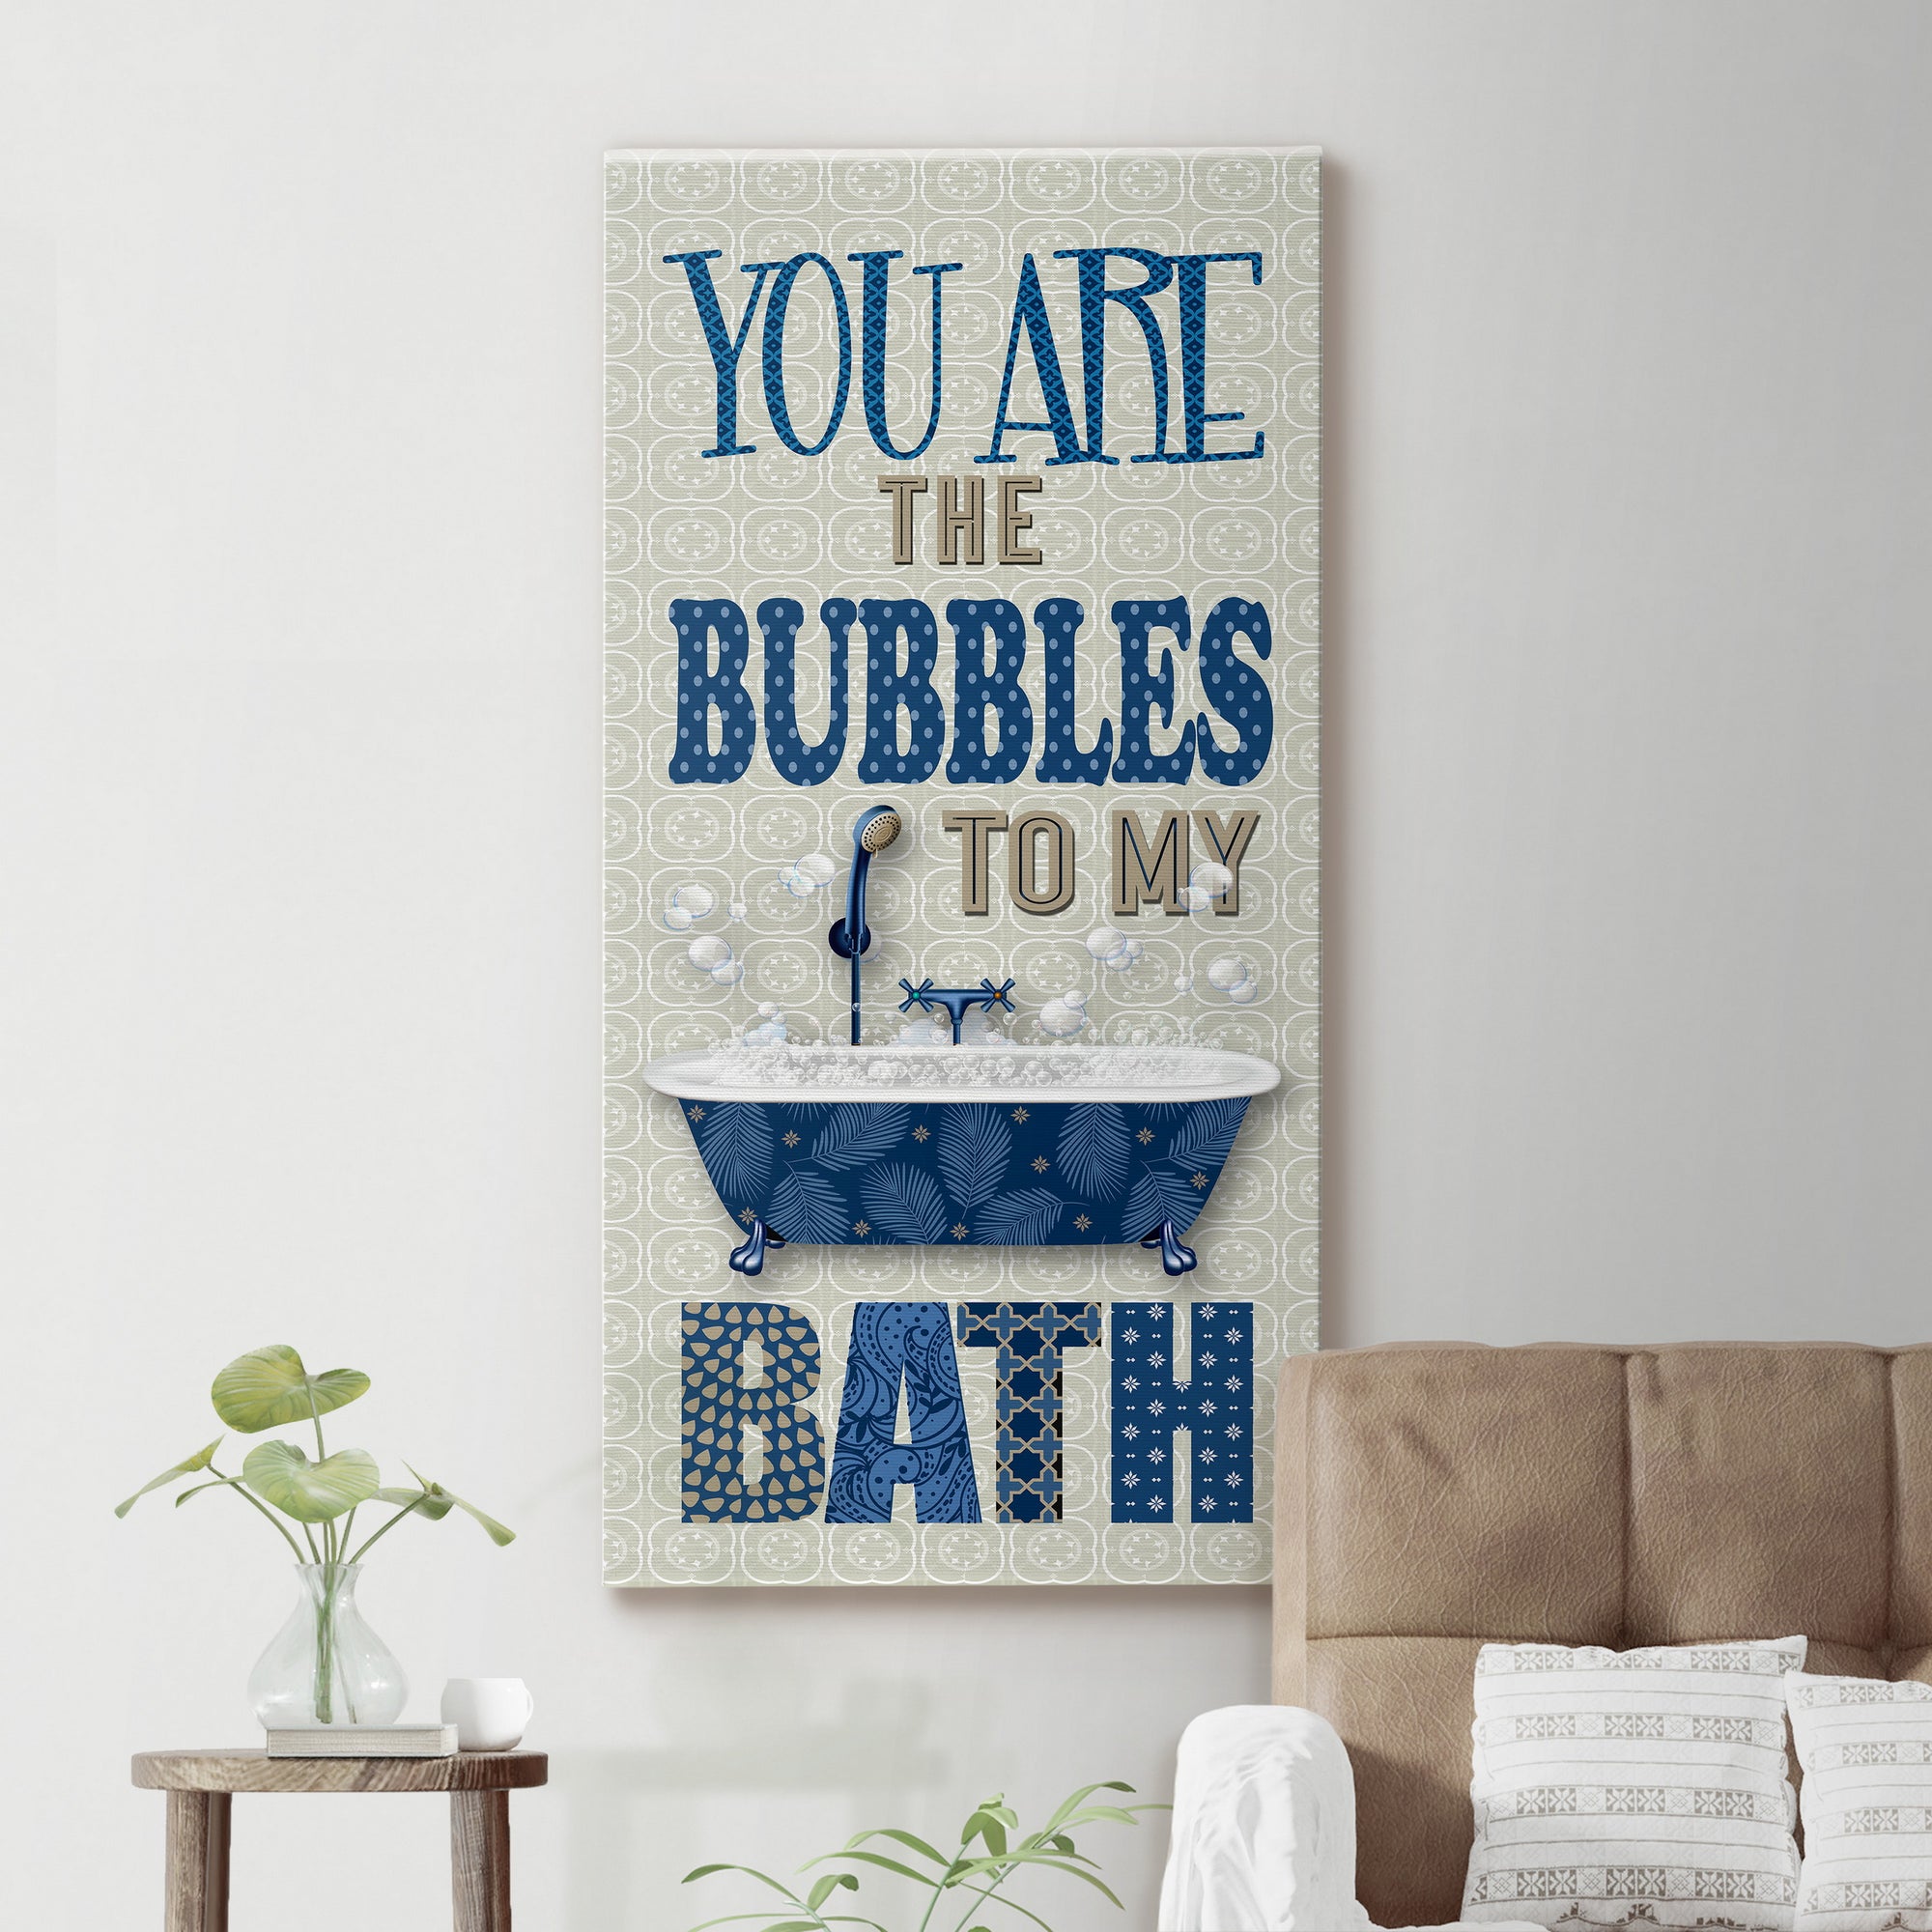 Bubbles to My Bath - Premium Gallery Wrapped Canvas - Ready to Hang